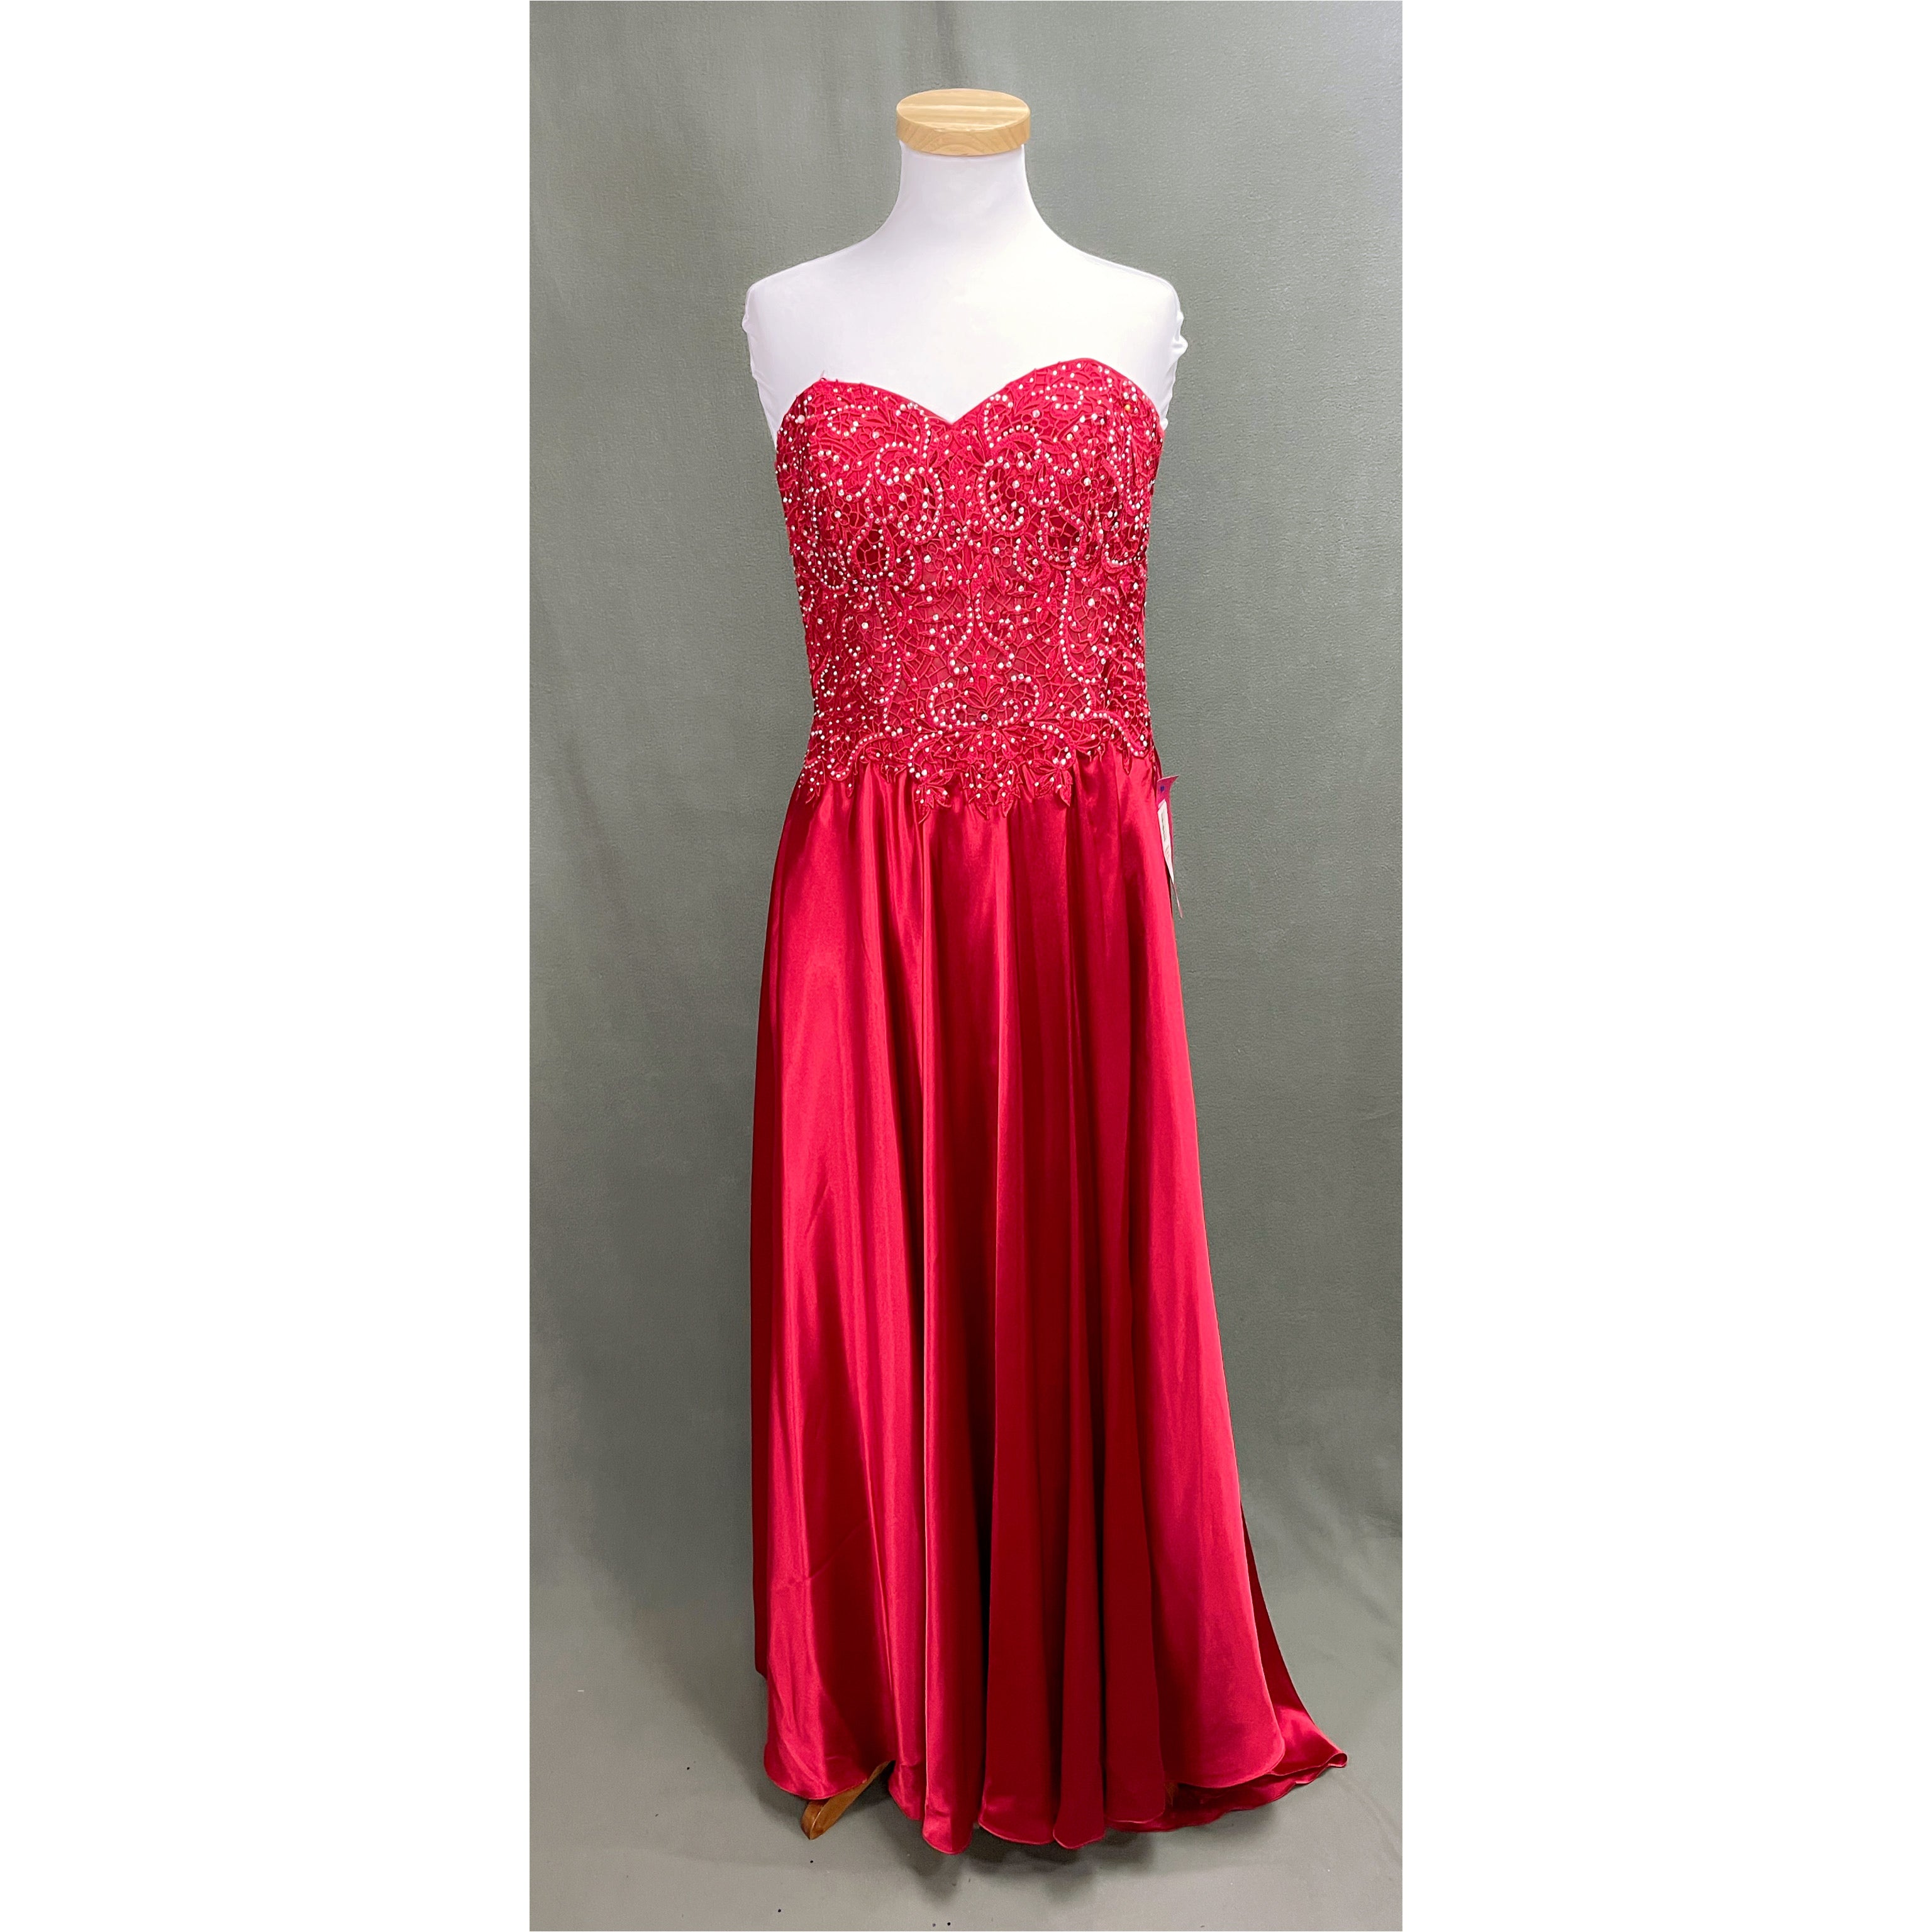 Blondie Nites red dress, size 13, NEW WITH TAGS!